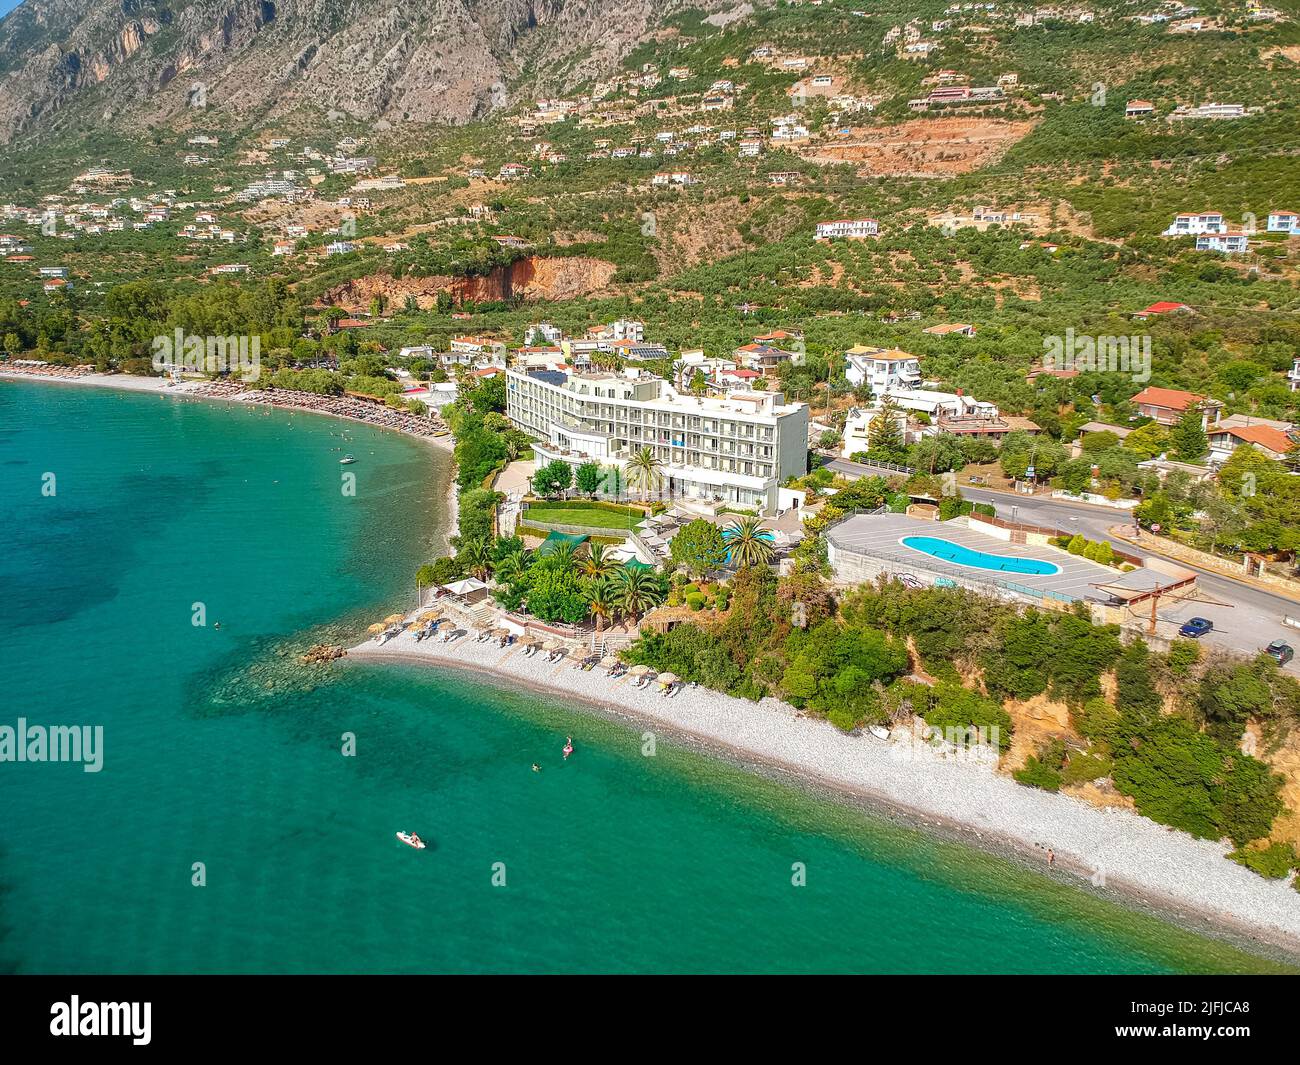 Aerial view over Almyros beach with luxurious hotels and resorts in Kato verga kalamata, Greece. Stock Photo